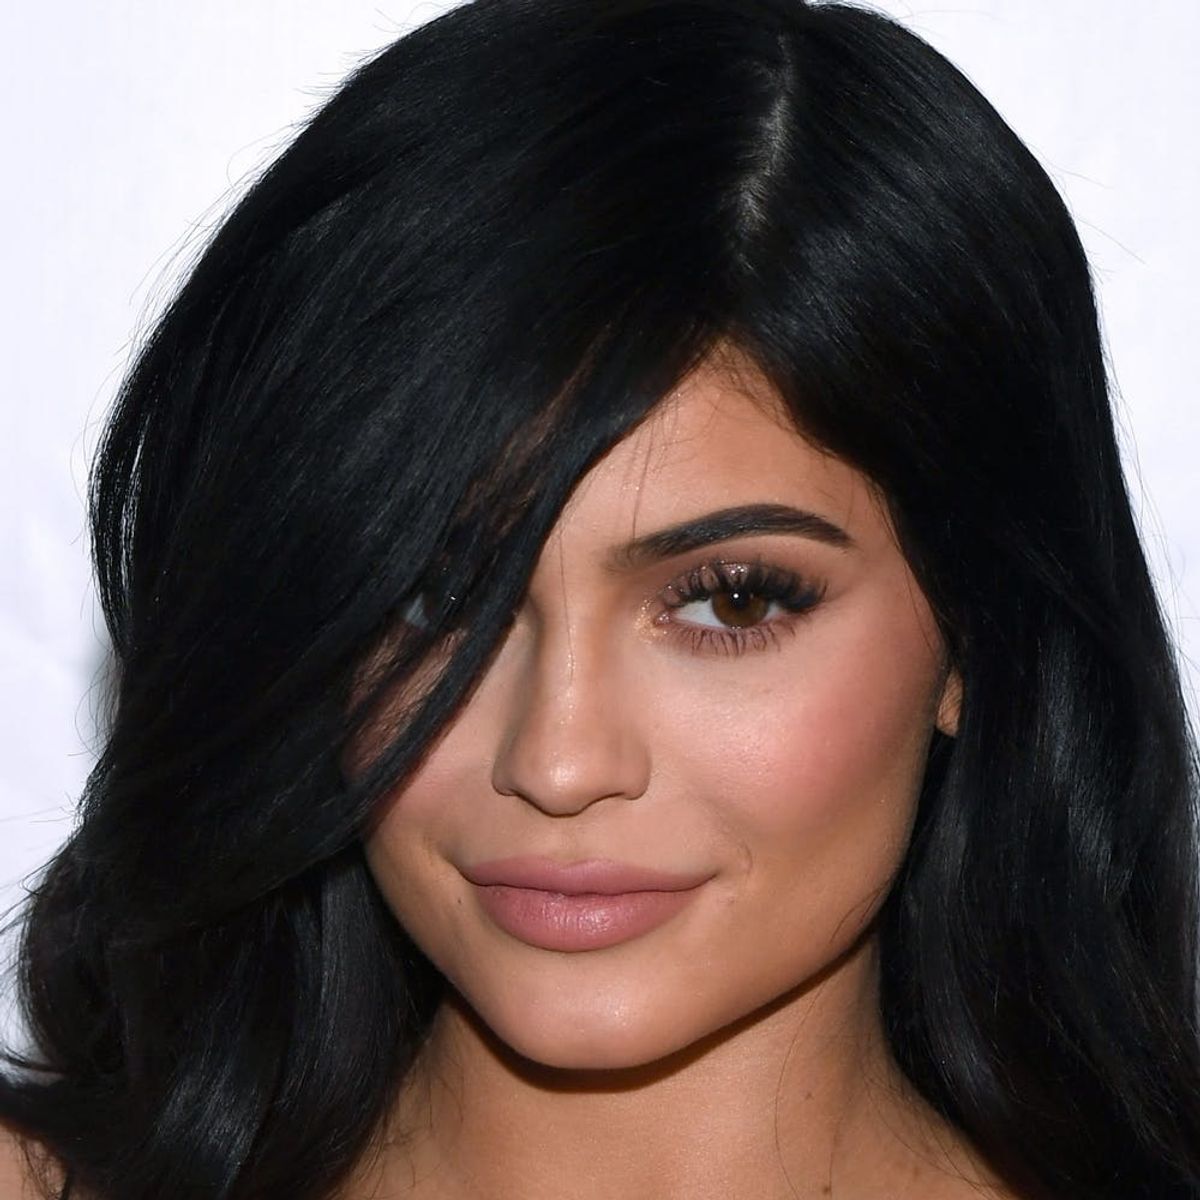 Kylie Jenner Is Catching Major Heat from Fans Outraged Over the Price of Her Makeup Brush Set